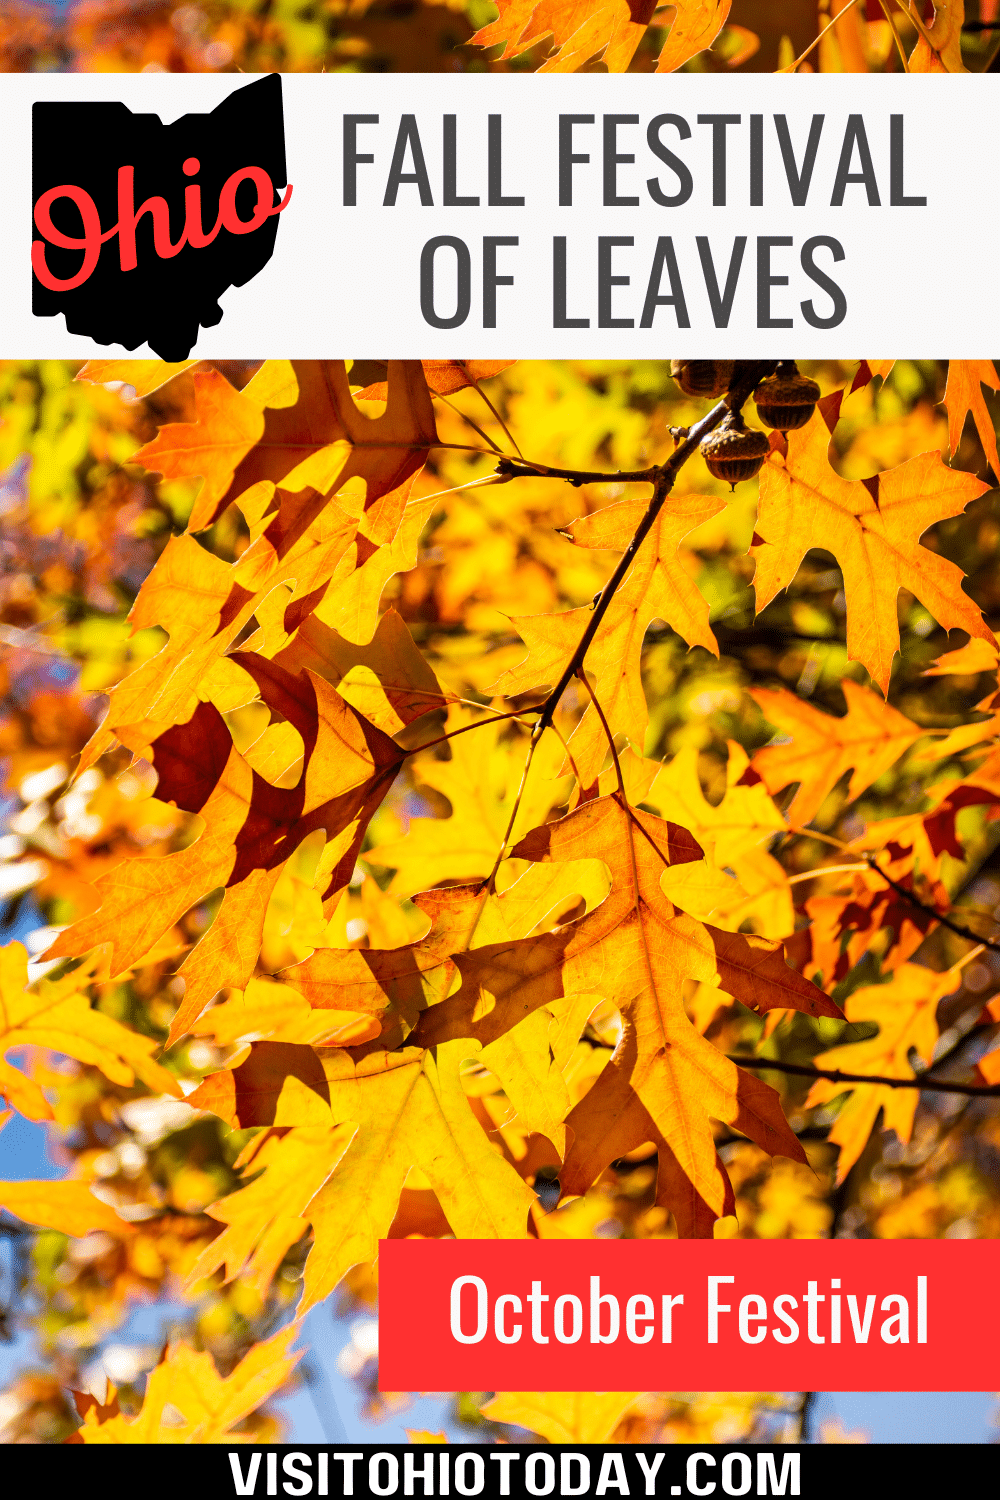 The Fall Festival of Leaves is a three-day event held in Bainbridge, Ohio – ‘Leaf Country, USA!’ This festival takes place over the third weekend October 20-22, 2023.